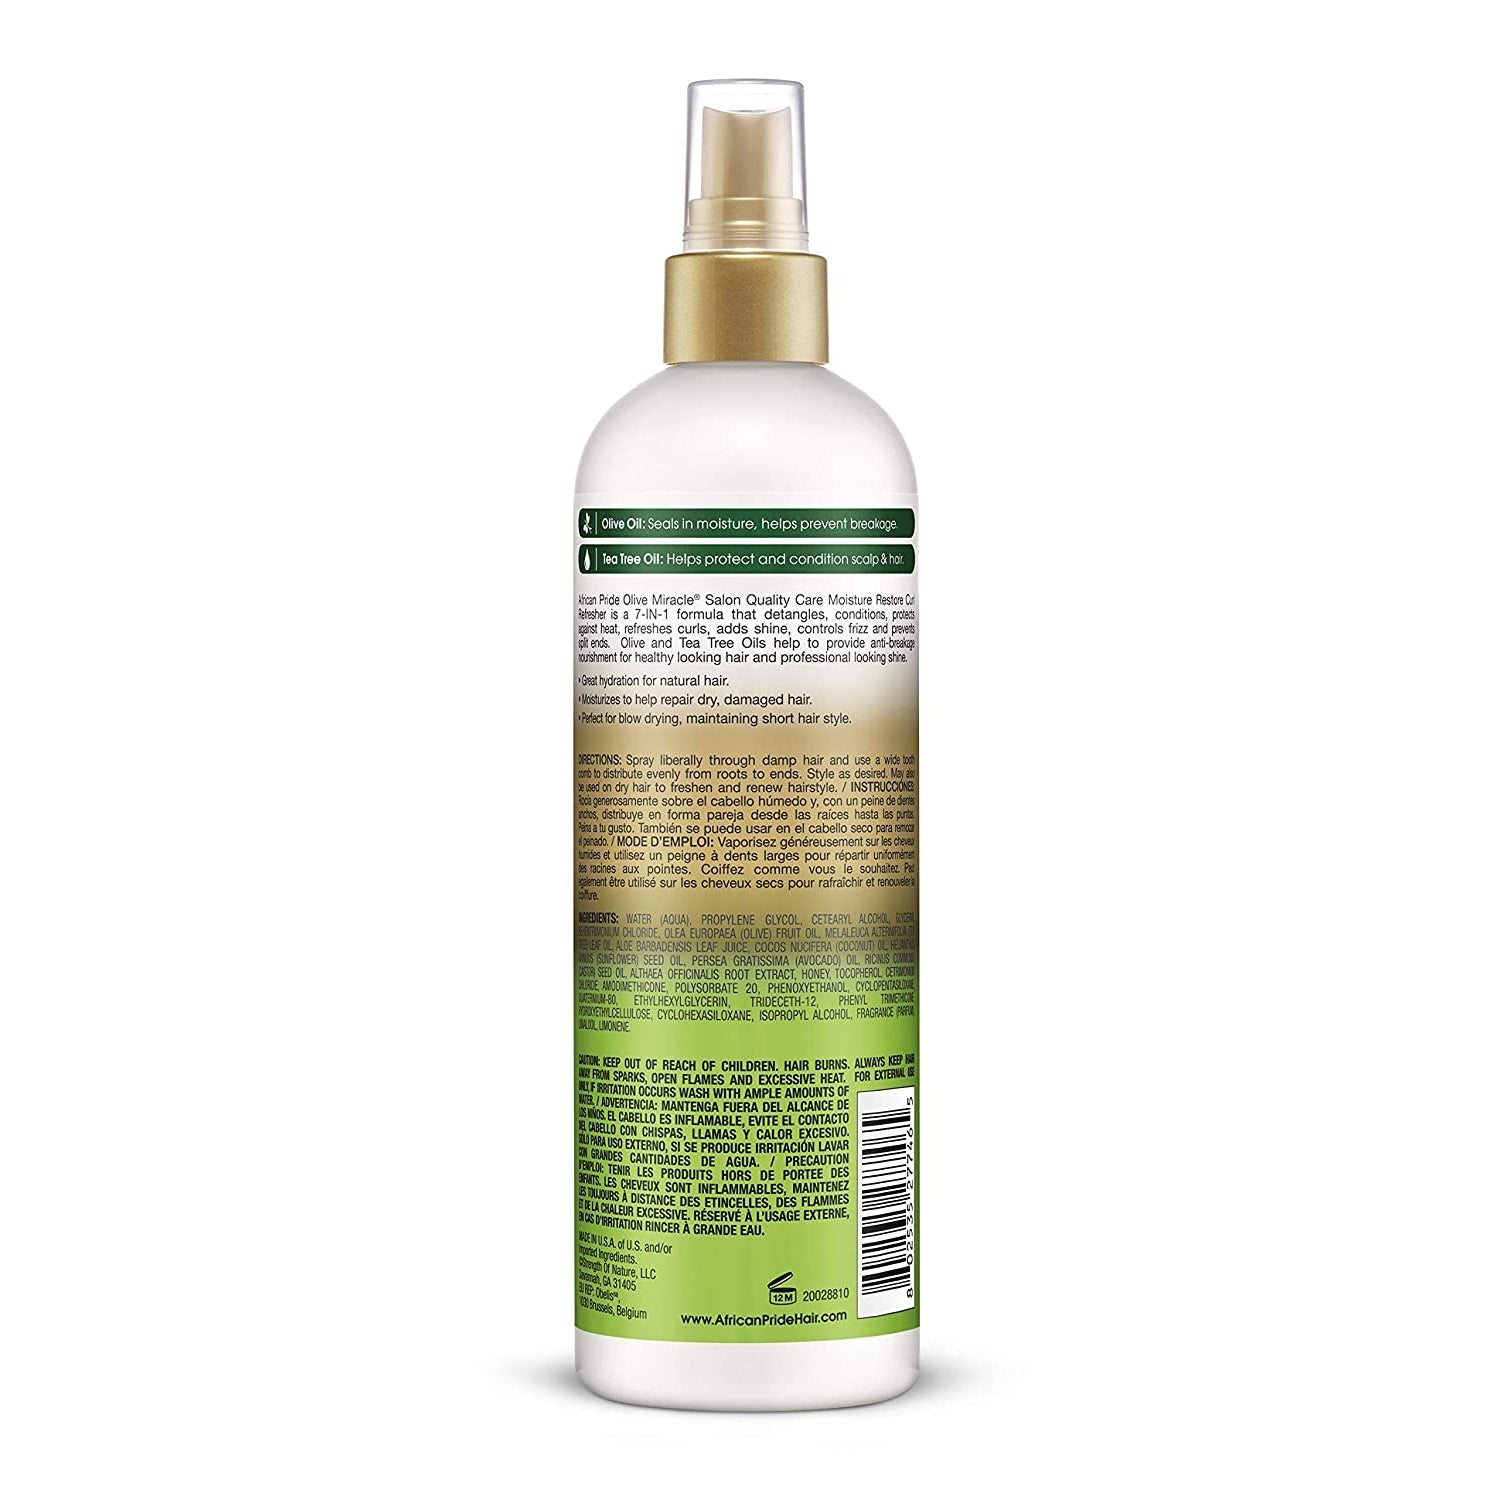 African Pride Olive Miracle 7-IN-1 Leave-In Moisture Hair Curl Refresher 12 oz